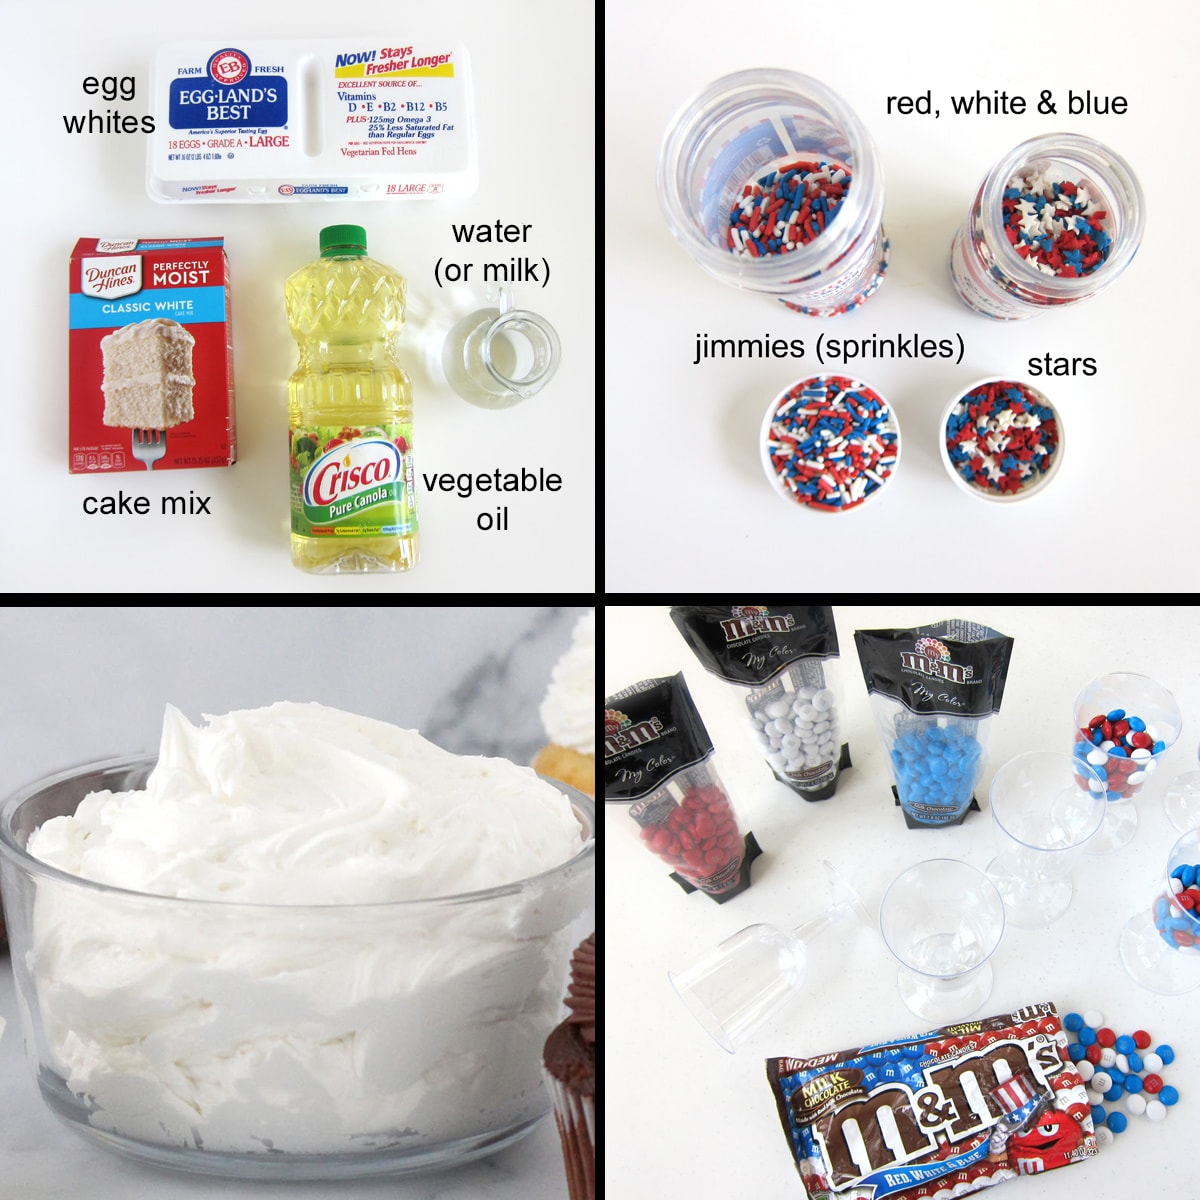 4th of July cupcakes recipe ingredients including cake mix, egg whites, oil, sprinkles, frosting, and M&M's.